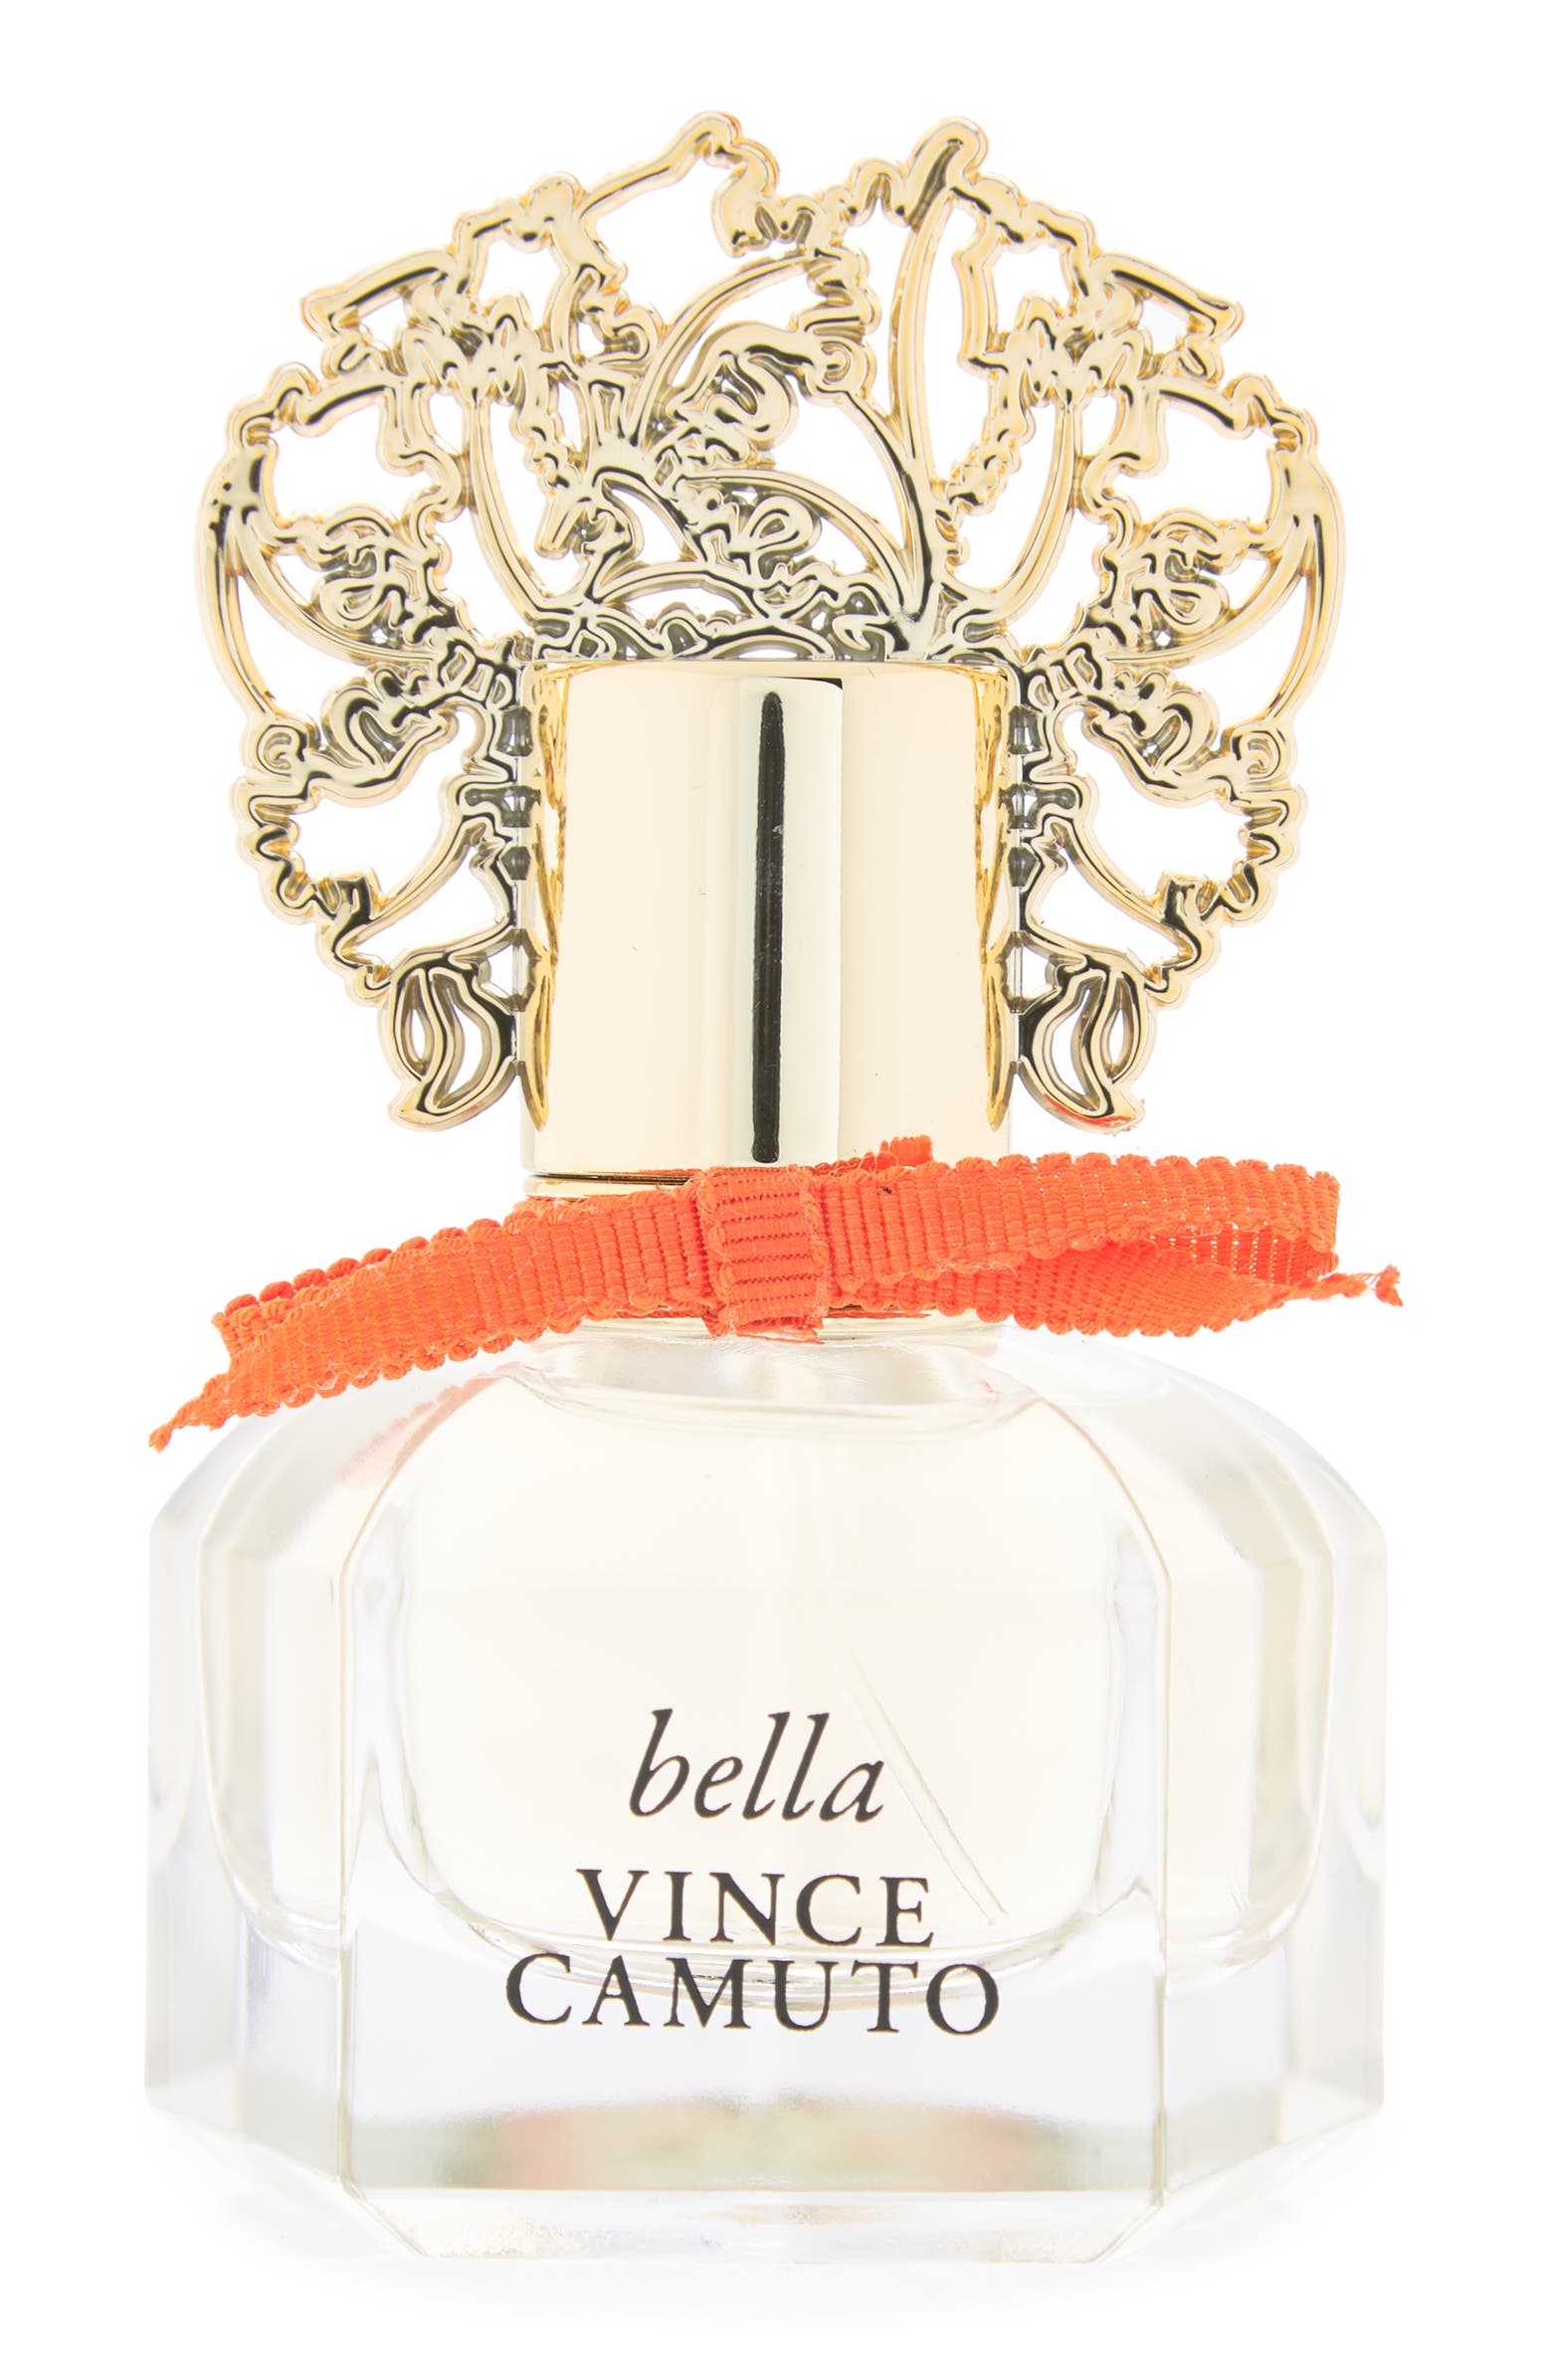 Vince Camuto Perfume by Vince Camuto